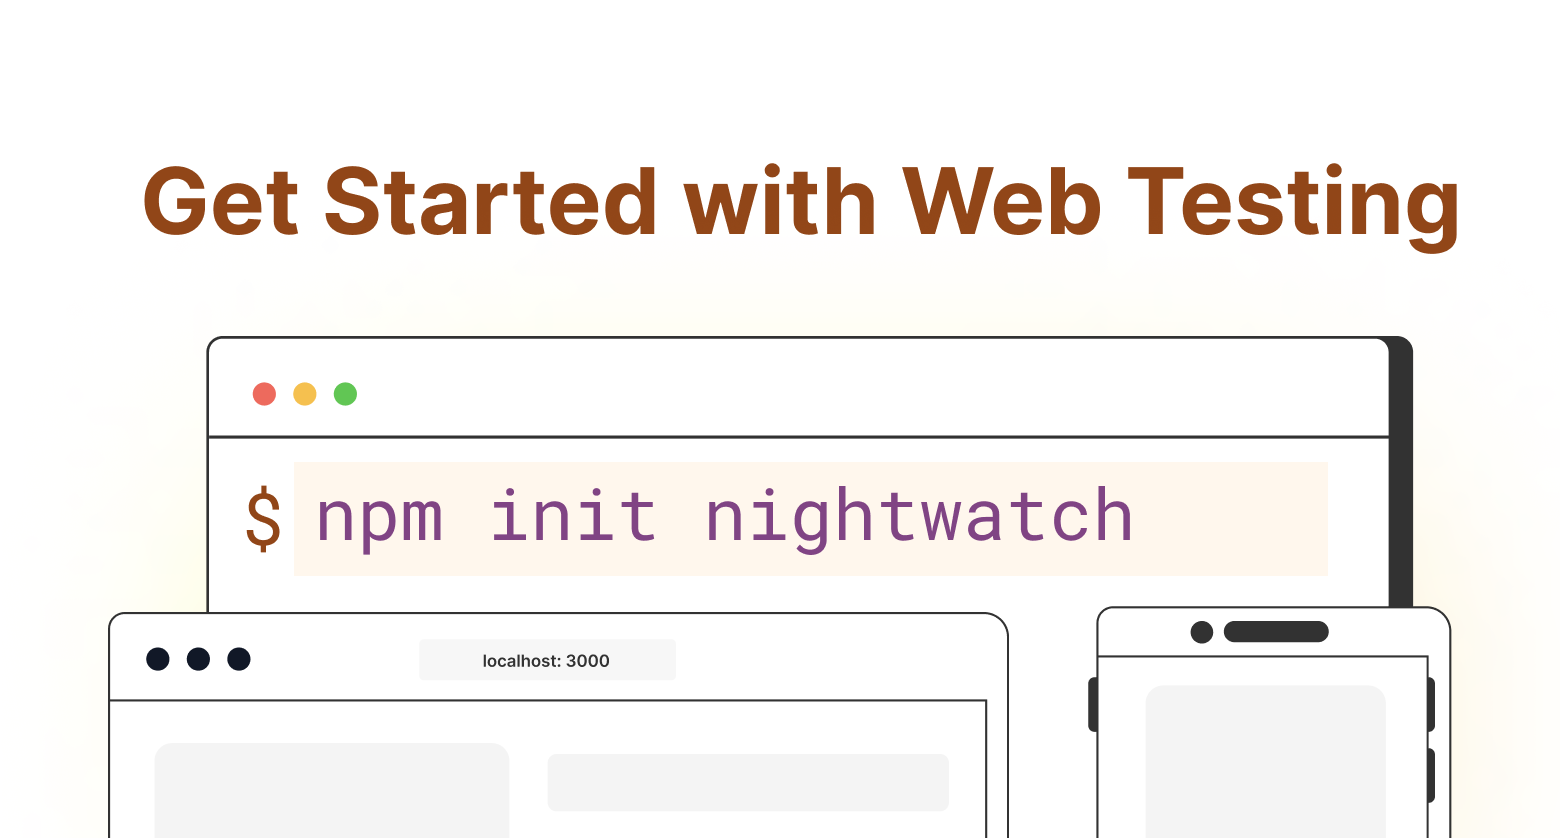 Get Started with Web Testing Using Nightwatch